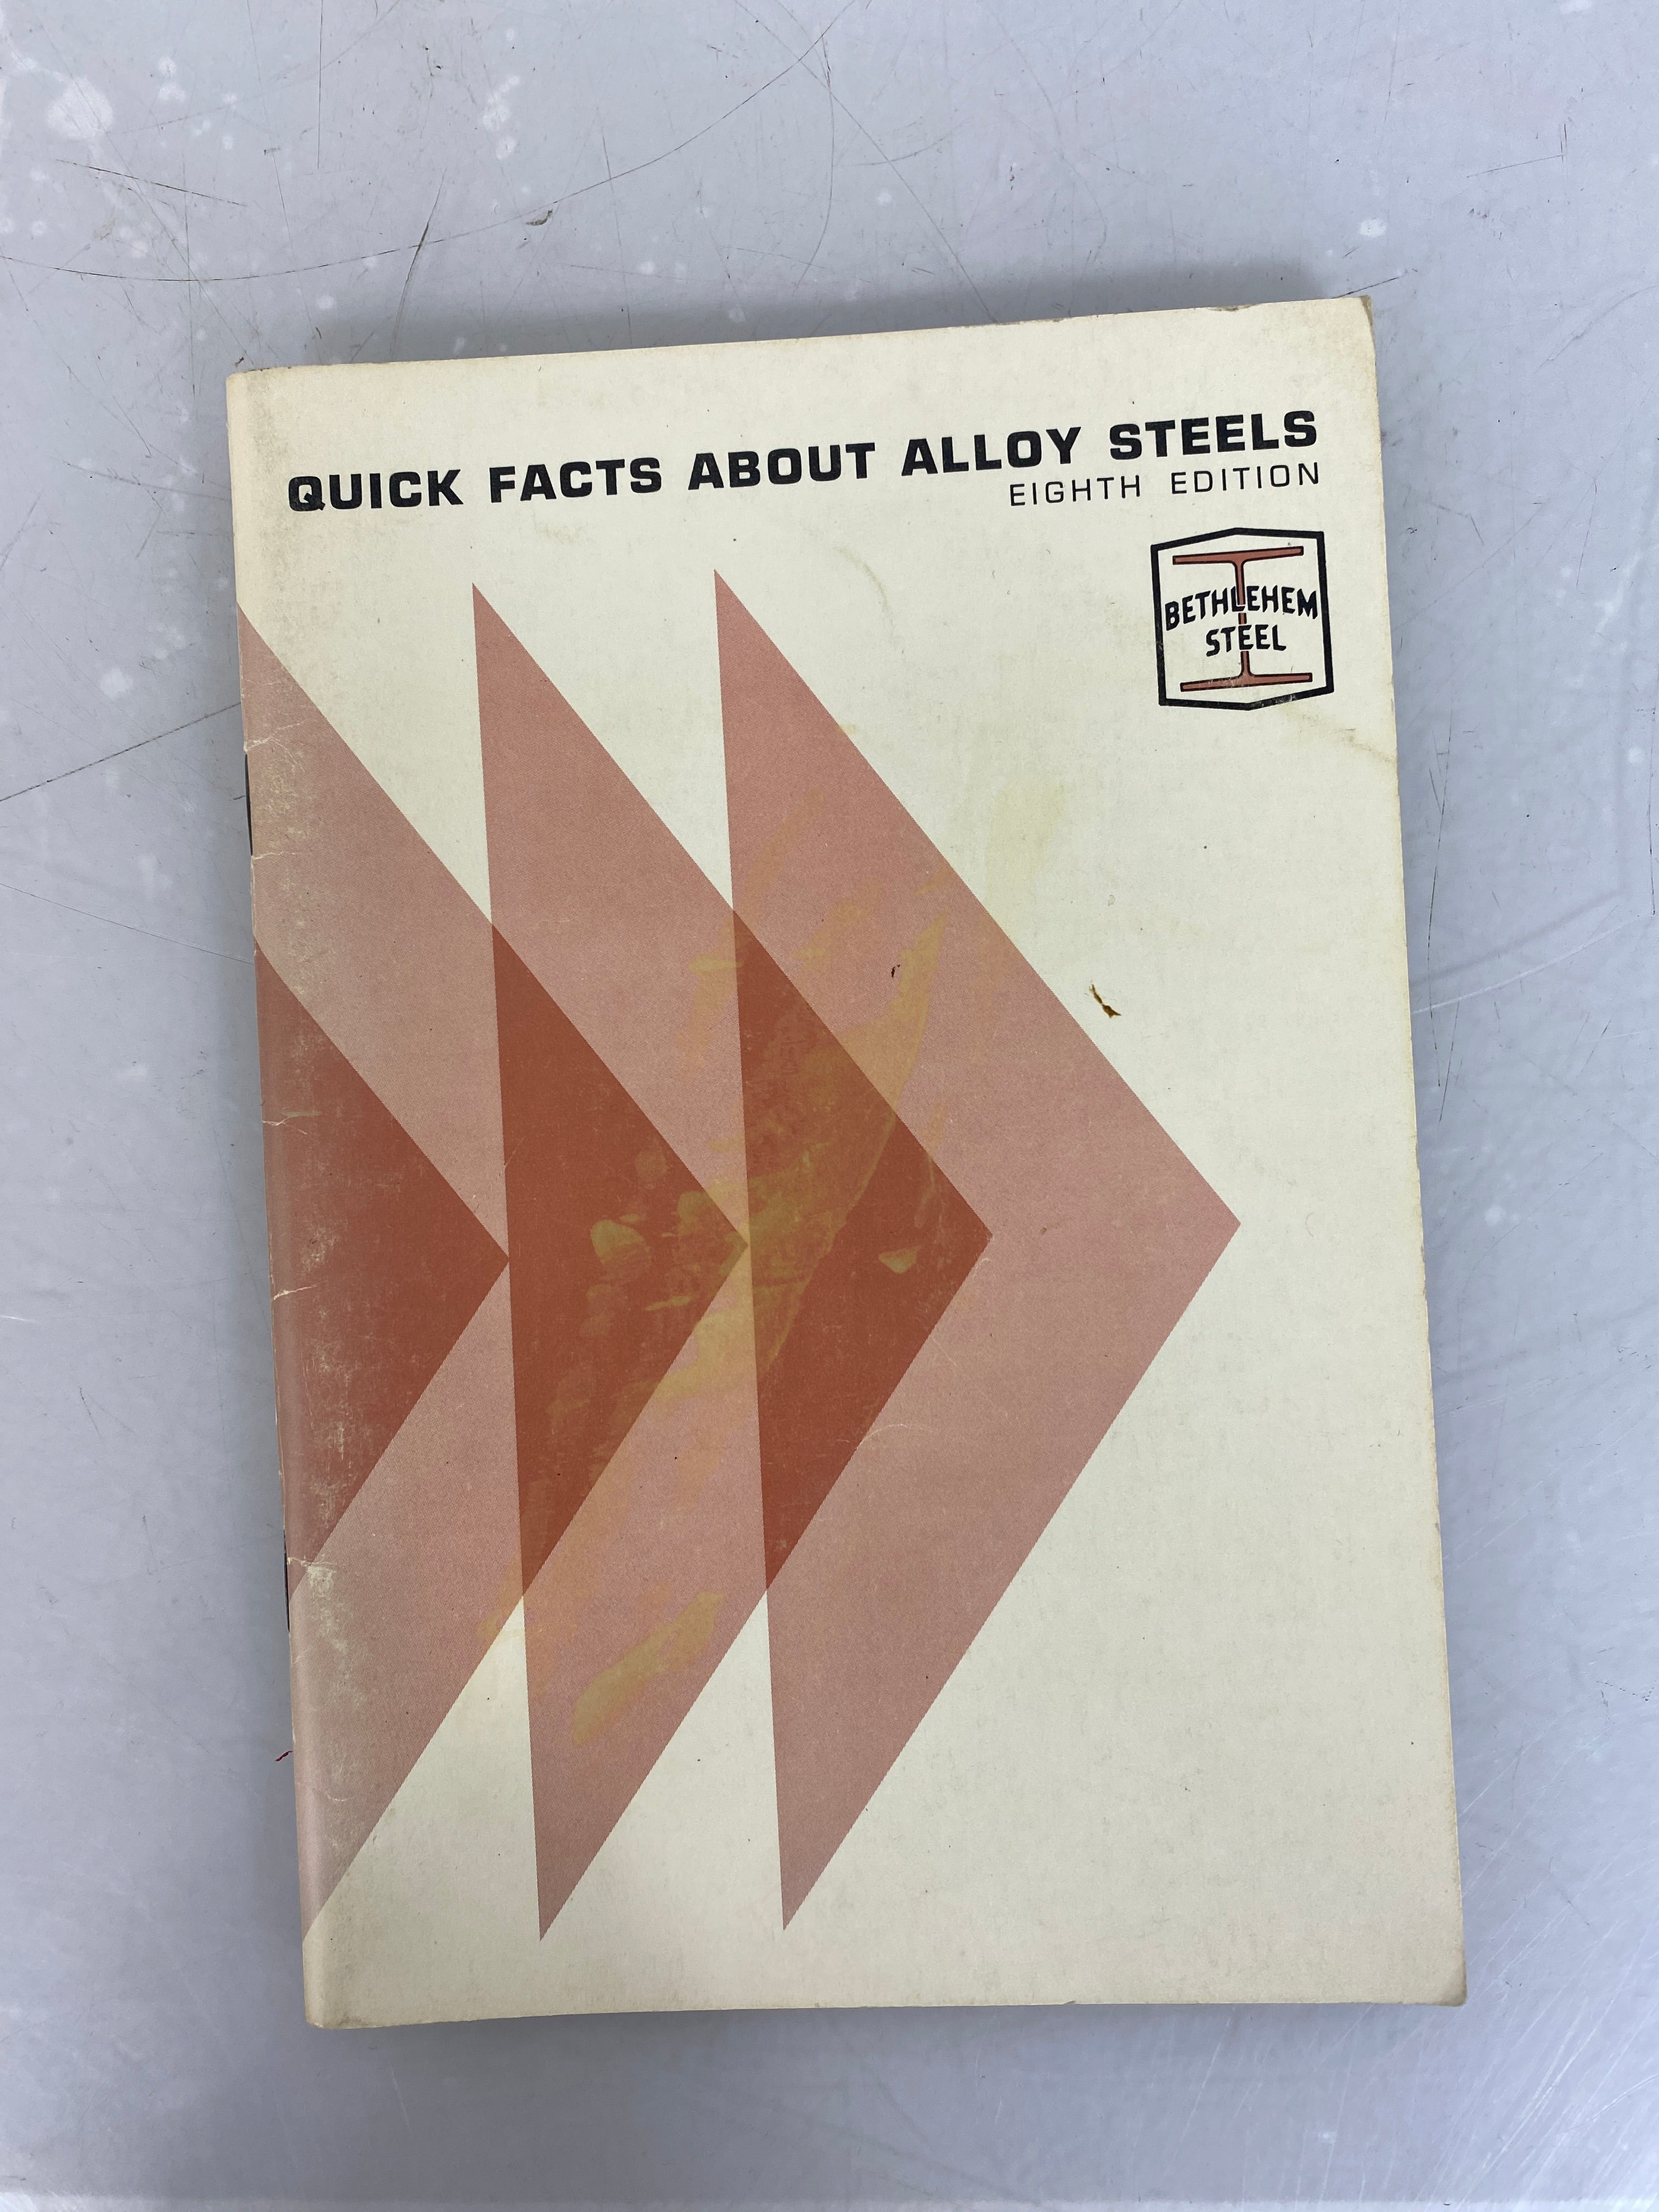 Quick Facts About Alloy Steels & Practical Data for Metallurgists 1960s SC